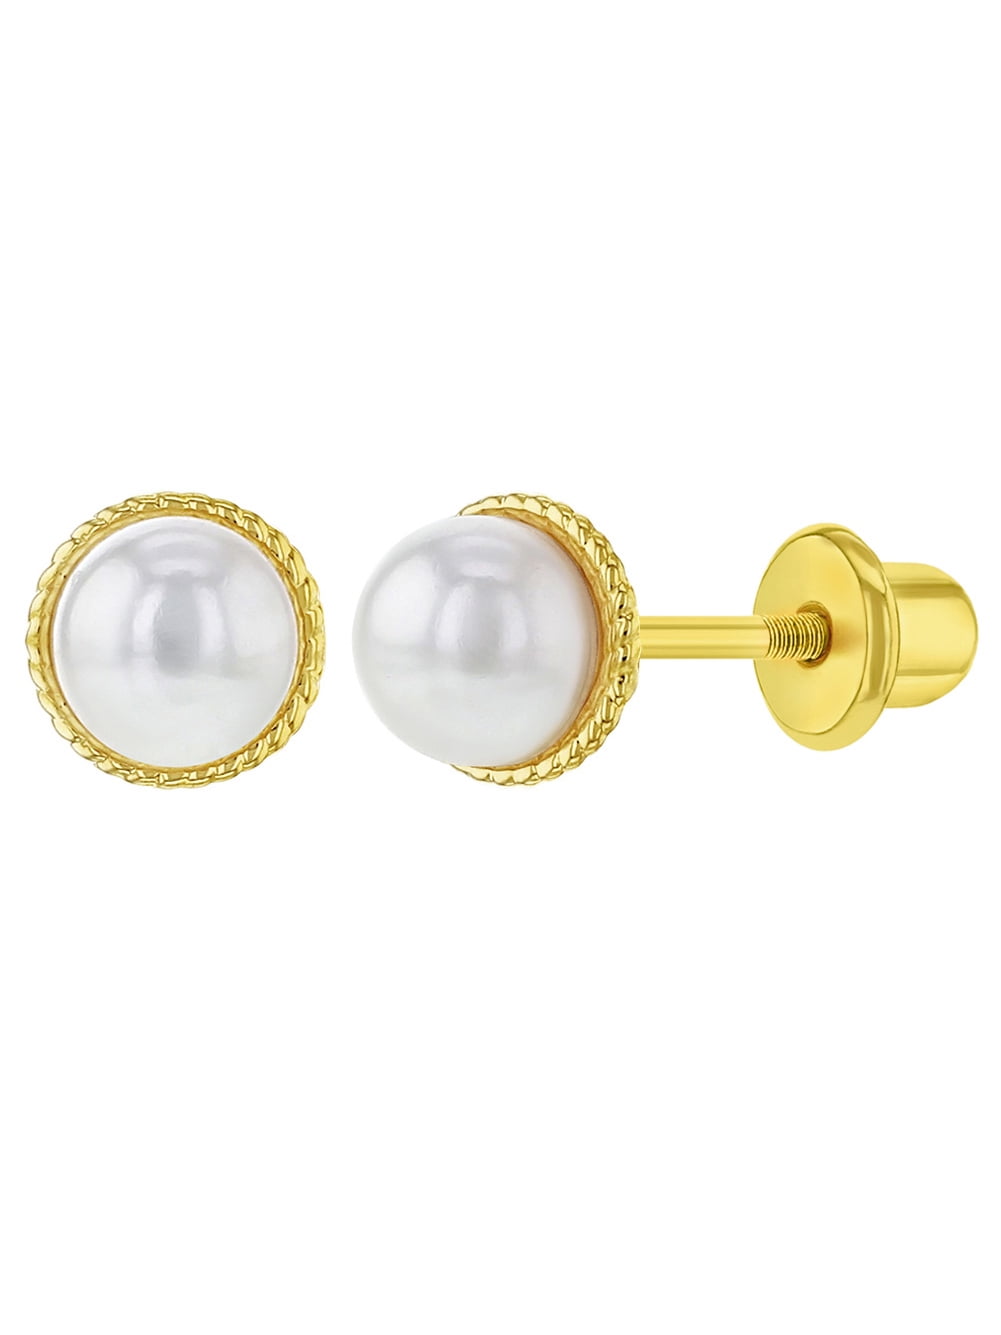 Details about   18k Gold Plated Rose Pink Simulated Pearl 4mm Screw Back Earrings Little Girls 